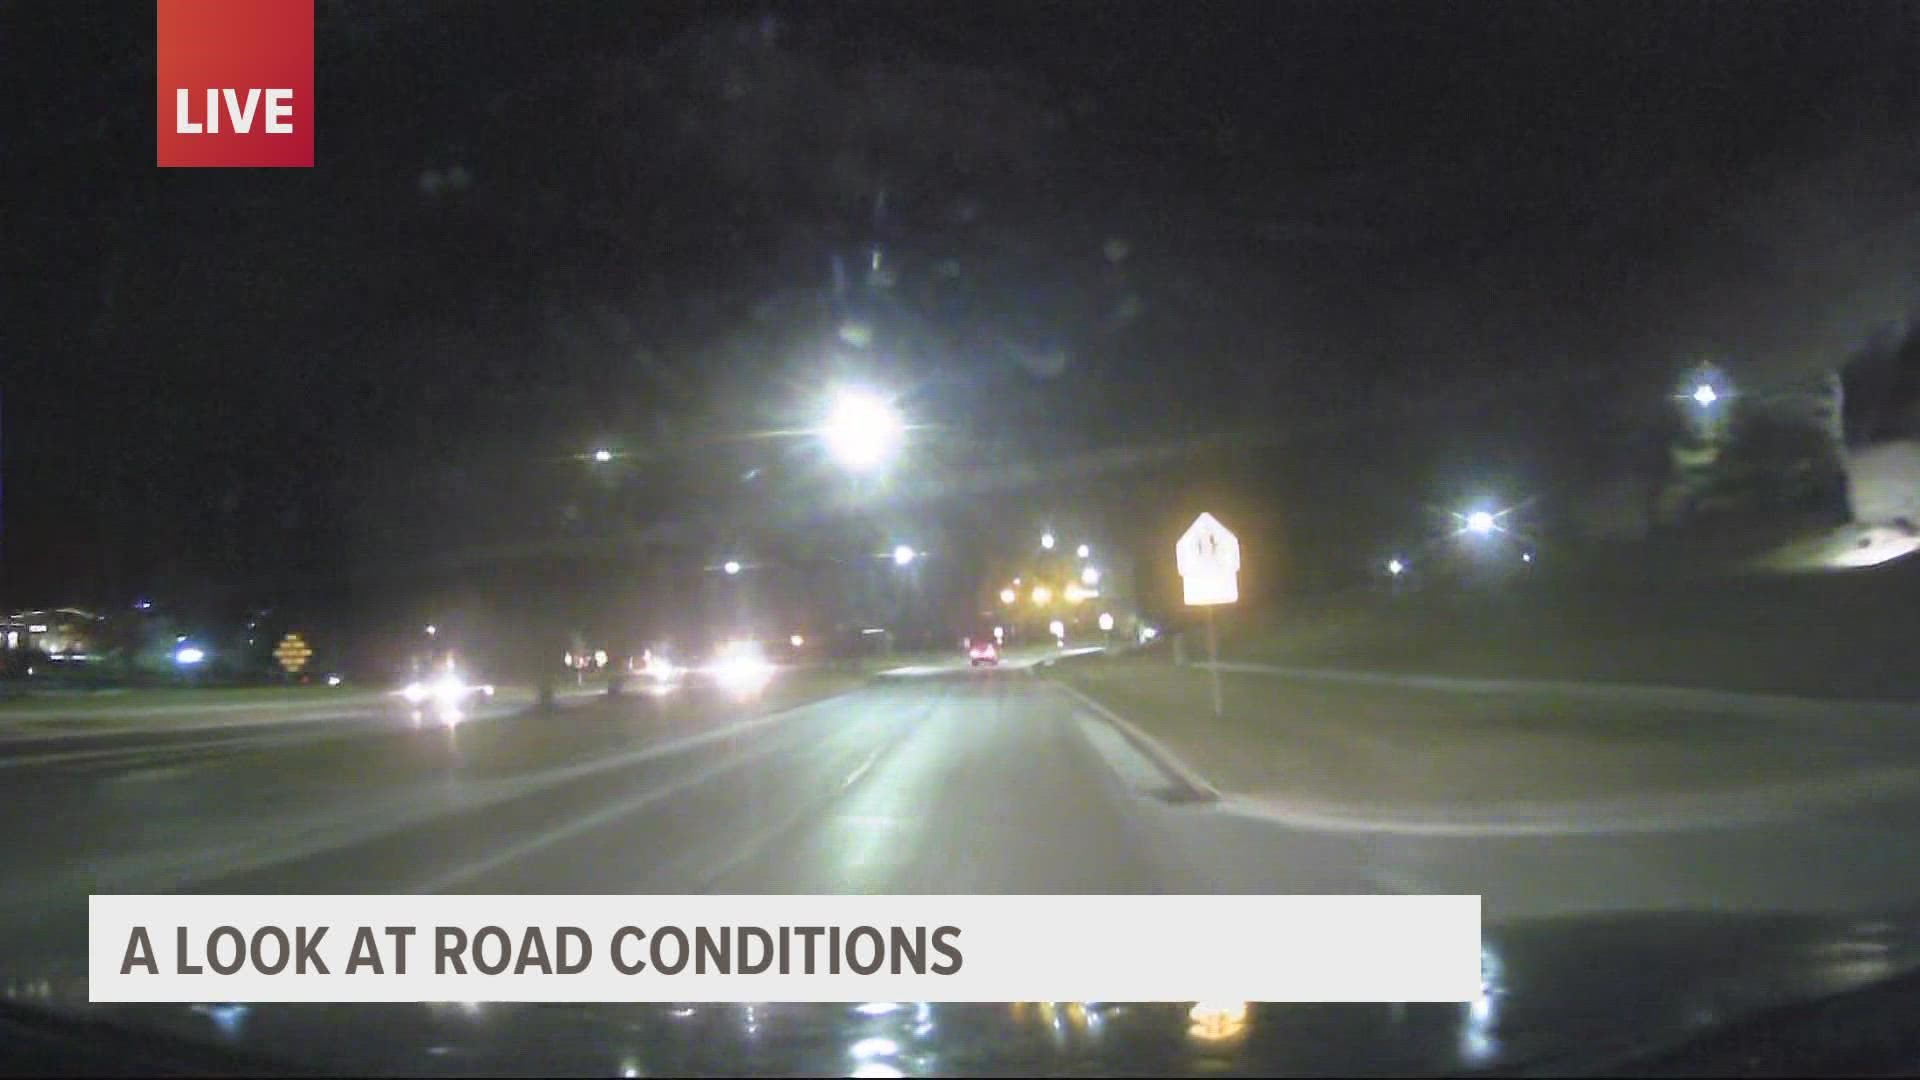 Local 5 Meteorologist Dave Downey gives an update on road conditions in the Des Moines metro as winter weather continues in Iowa.